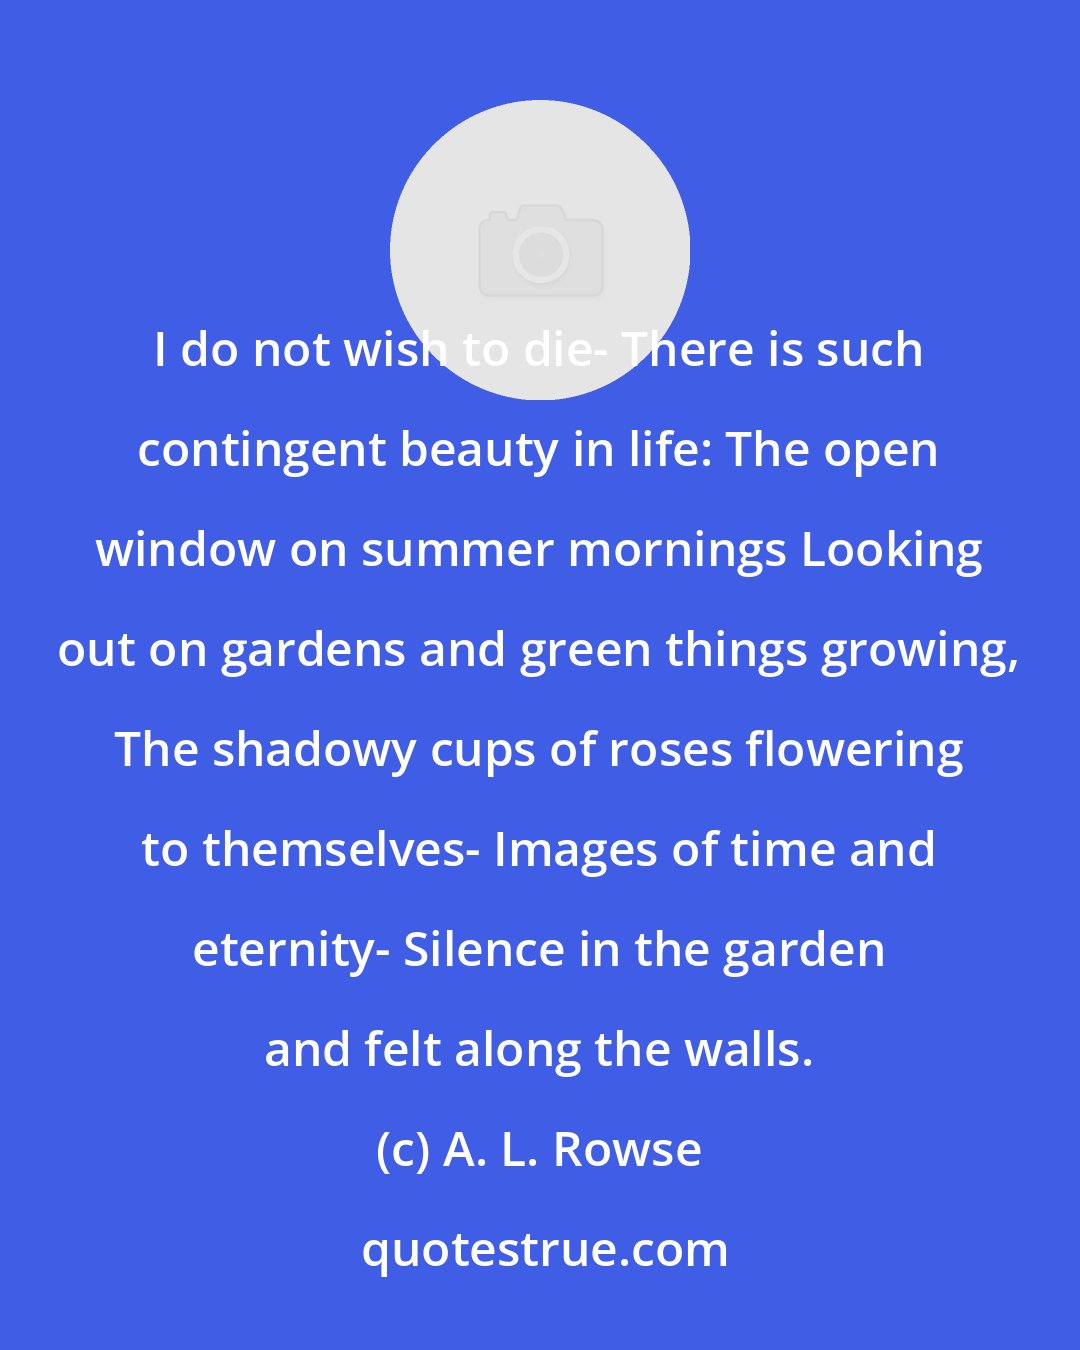 A. L. Rowse: I do not wish to die- There is such contingent beauty in life: The open window on summer mornings Looking out on gardens and green things growing, The shadowy cups of roses flowering to themselves- Images of time and eternity- Silence in the garden and felt along the walls.